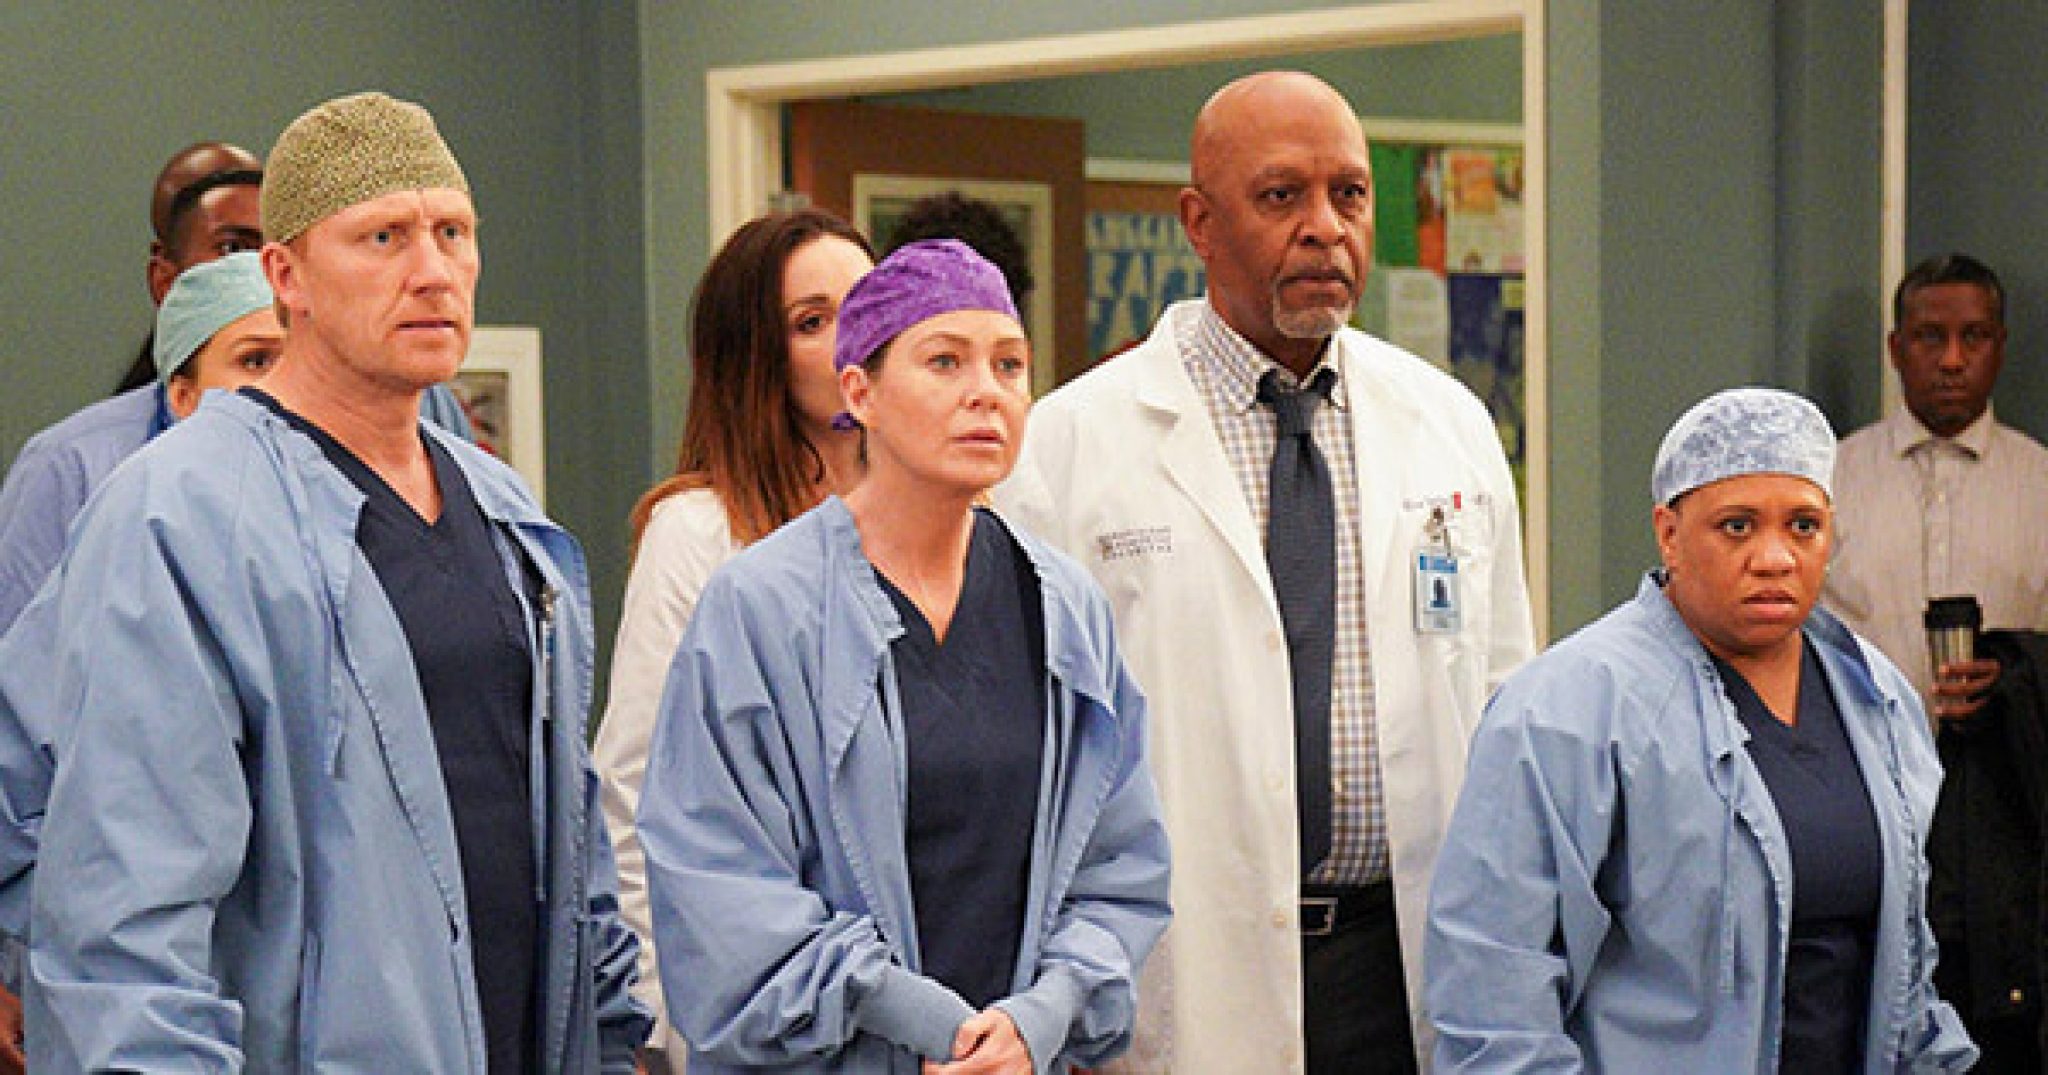 How to Access and Watch Grey's Anatomy on Netflix? Find Answers Here!